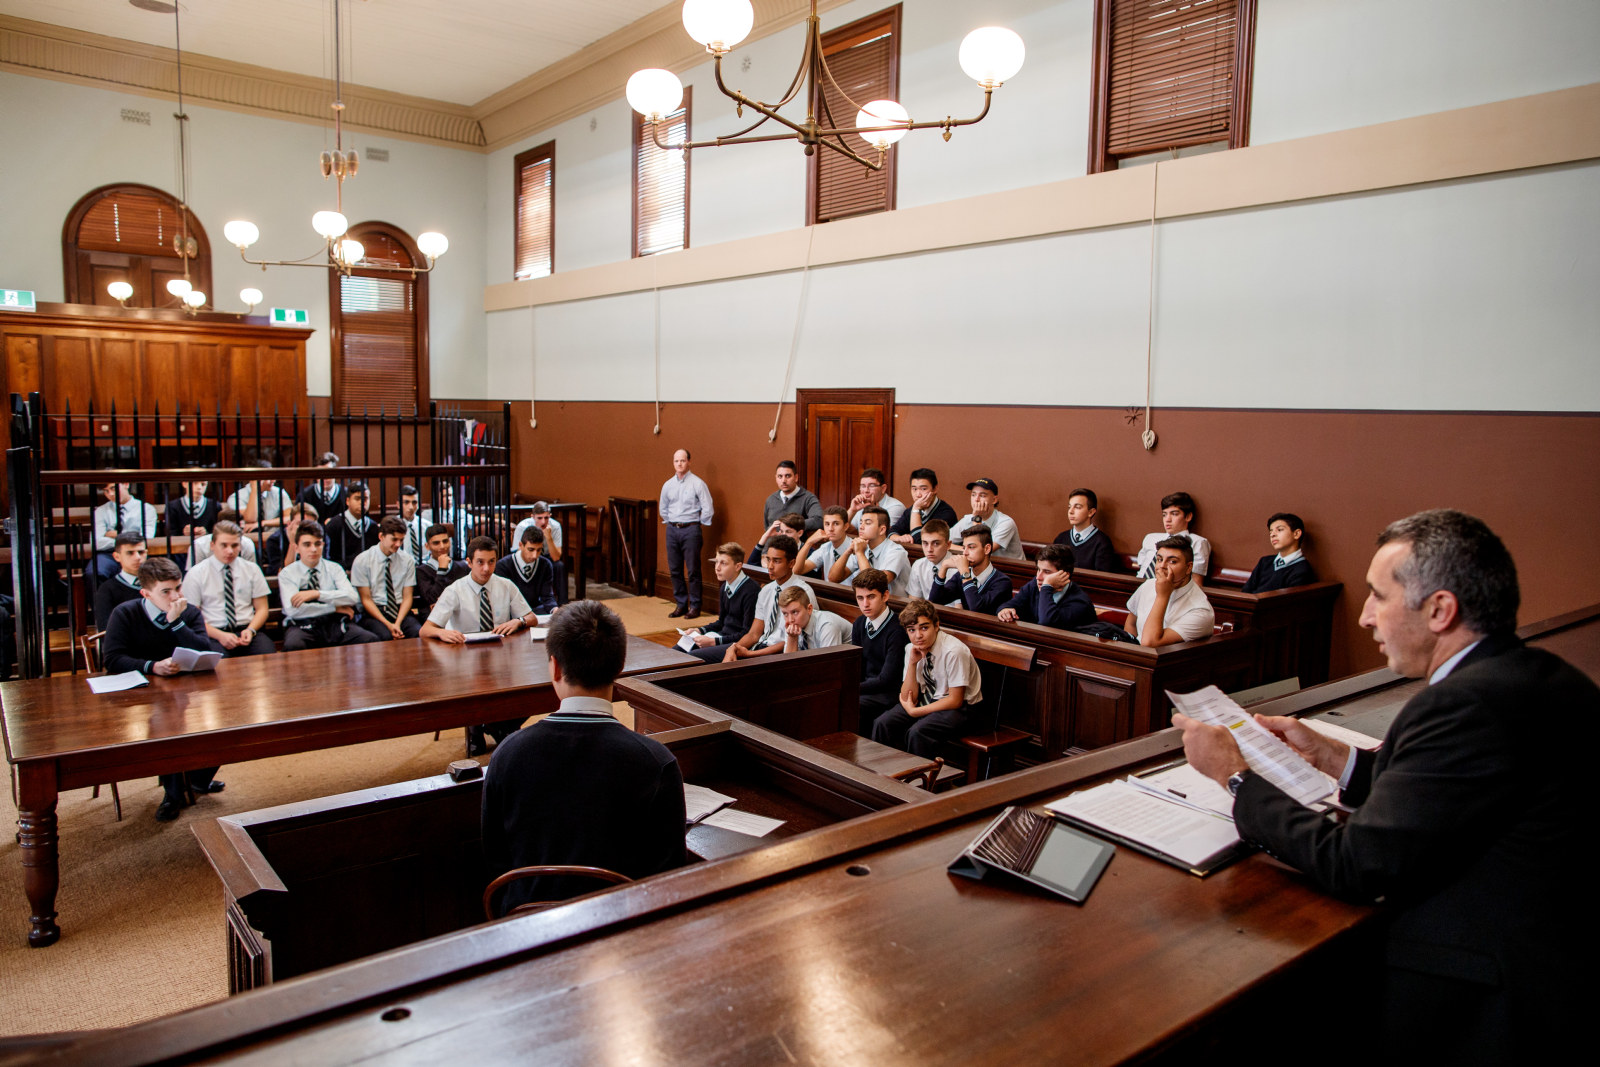 Students participating in A Trial Run at the Justice & Police Museum